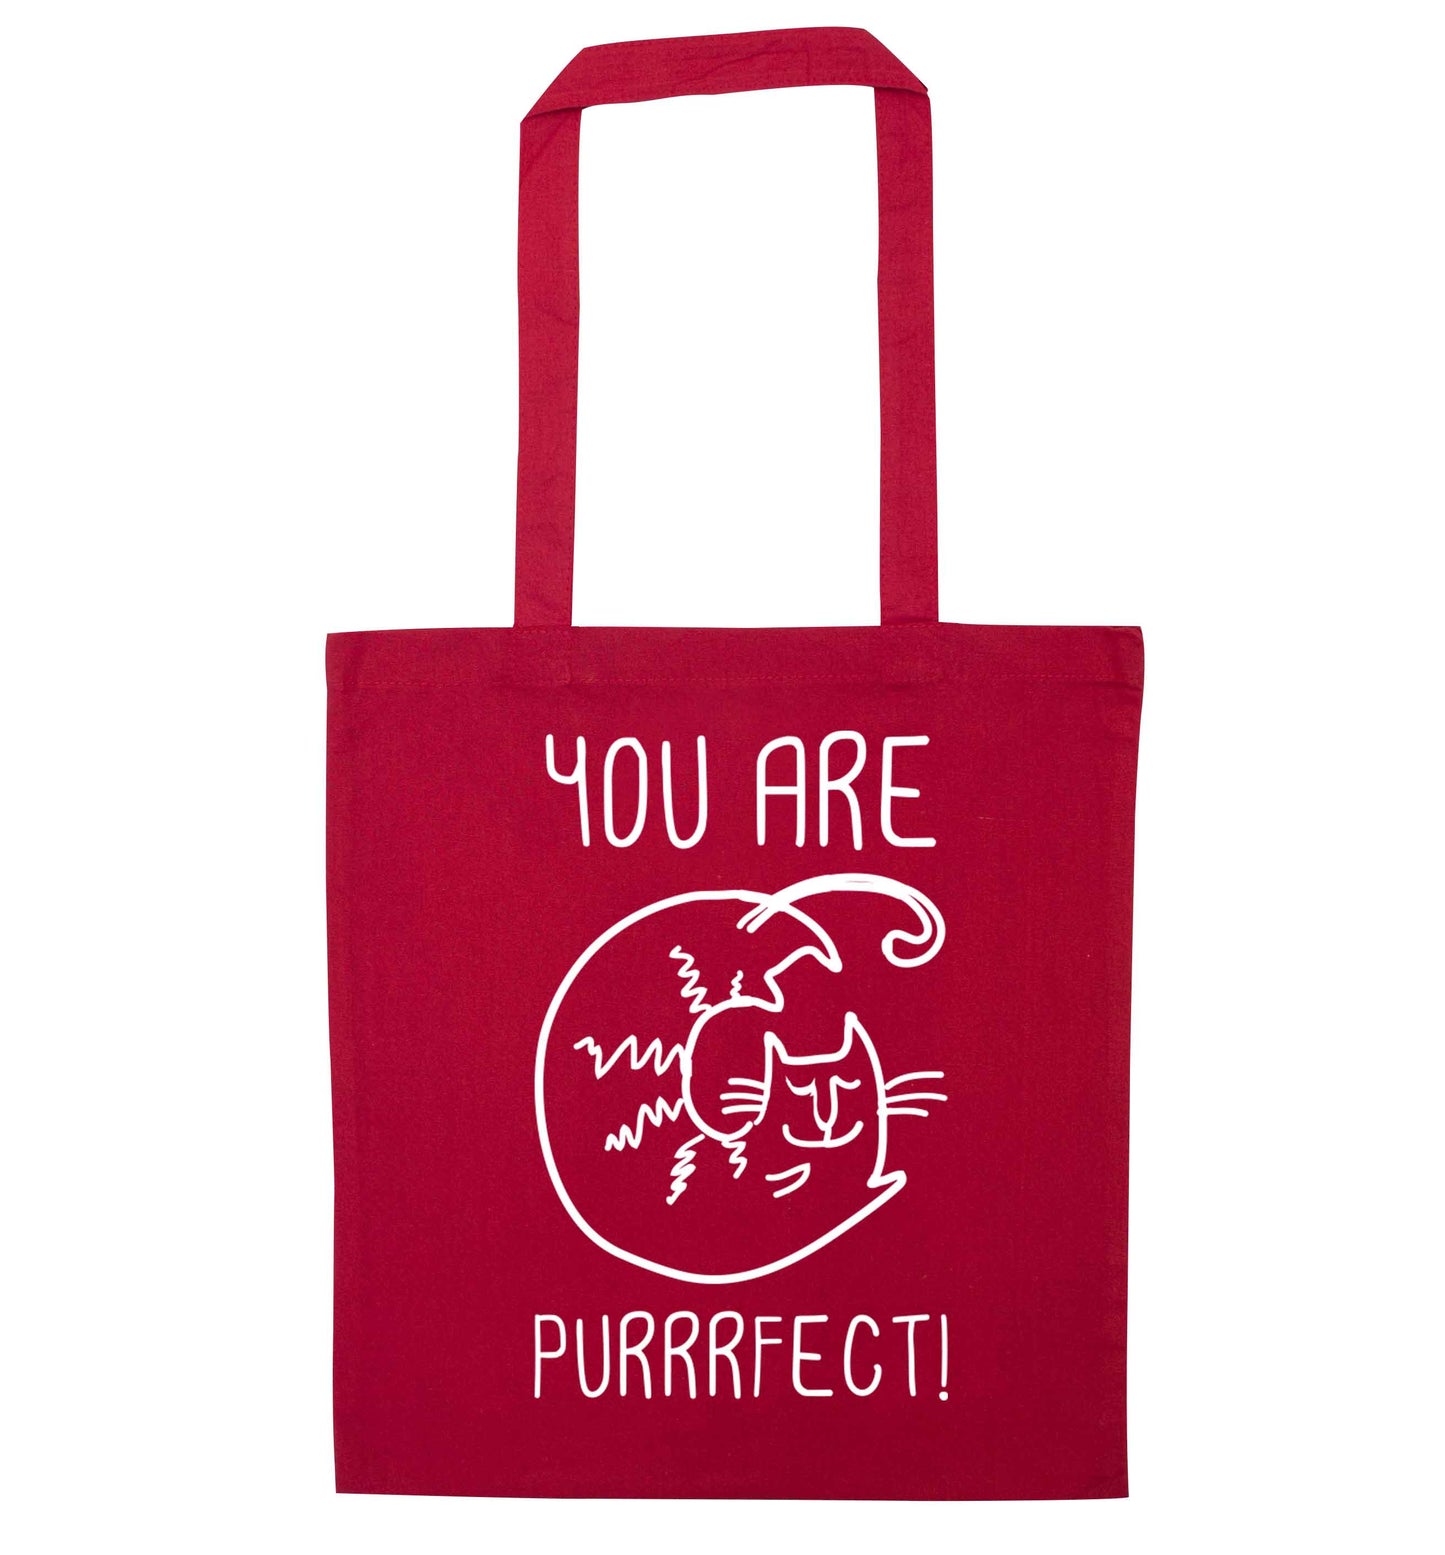 You are purrfect red tote bag